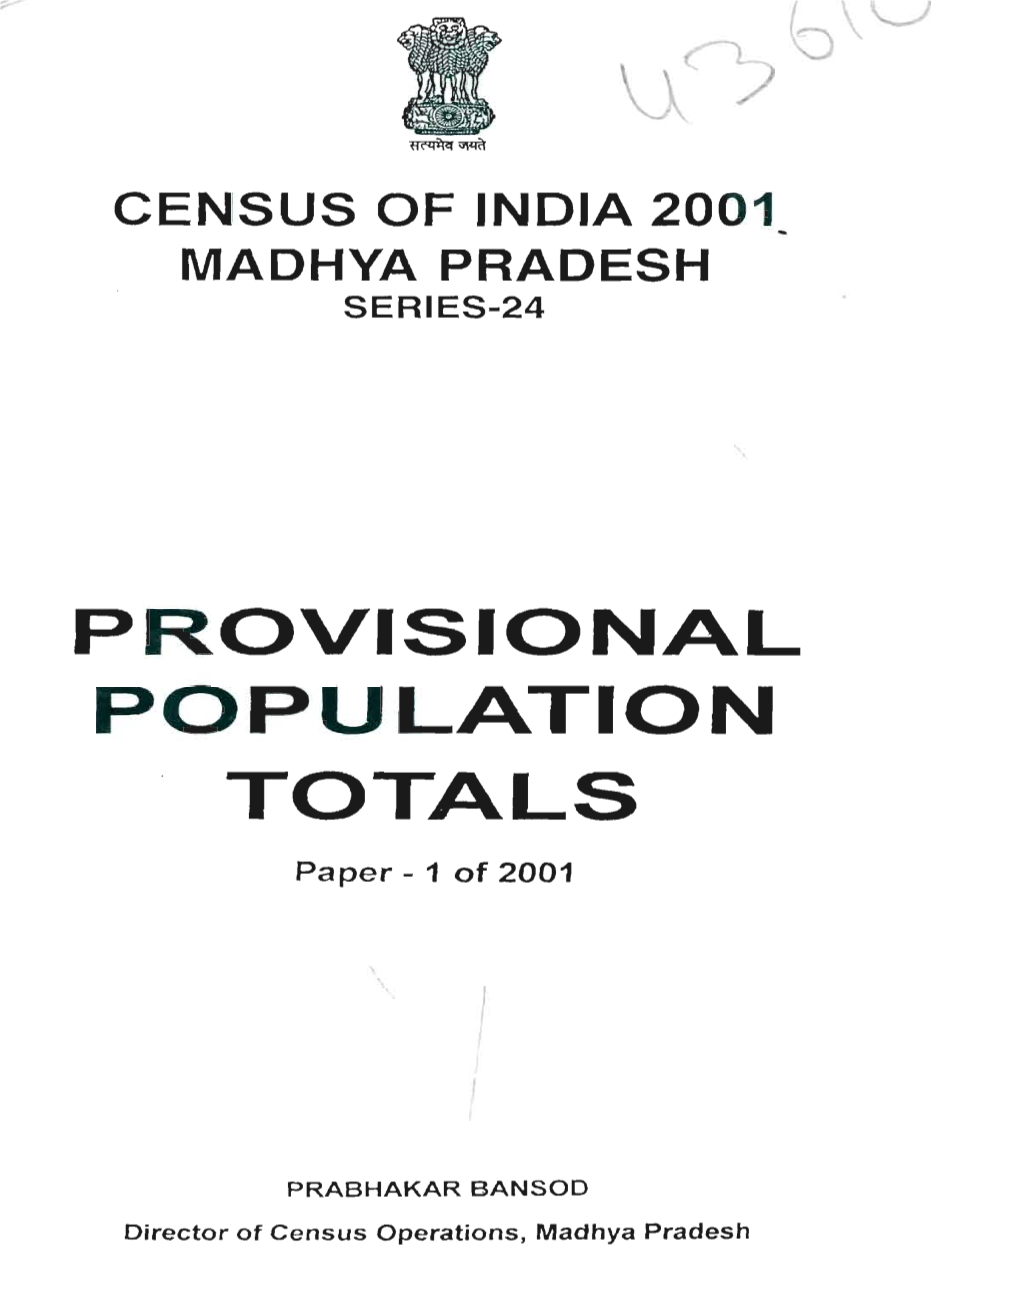 Provisional Population Totals, Series-24